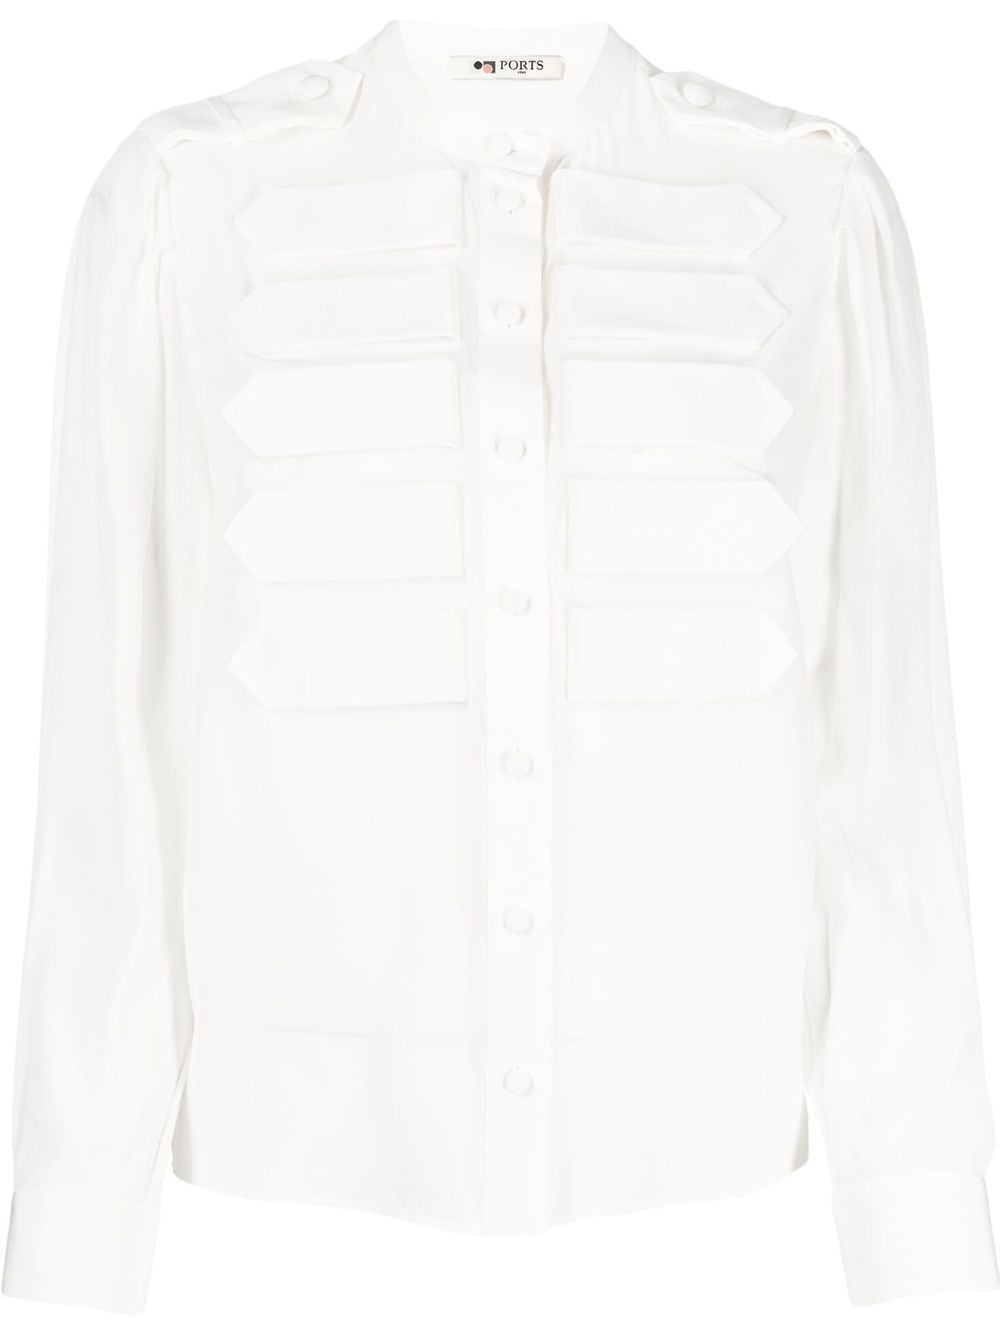 Ports 1961 Military-style Silk Shirt In White